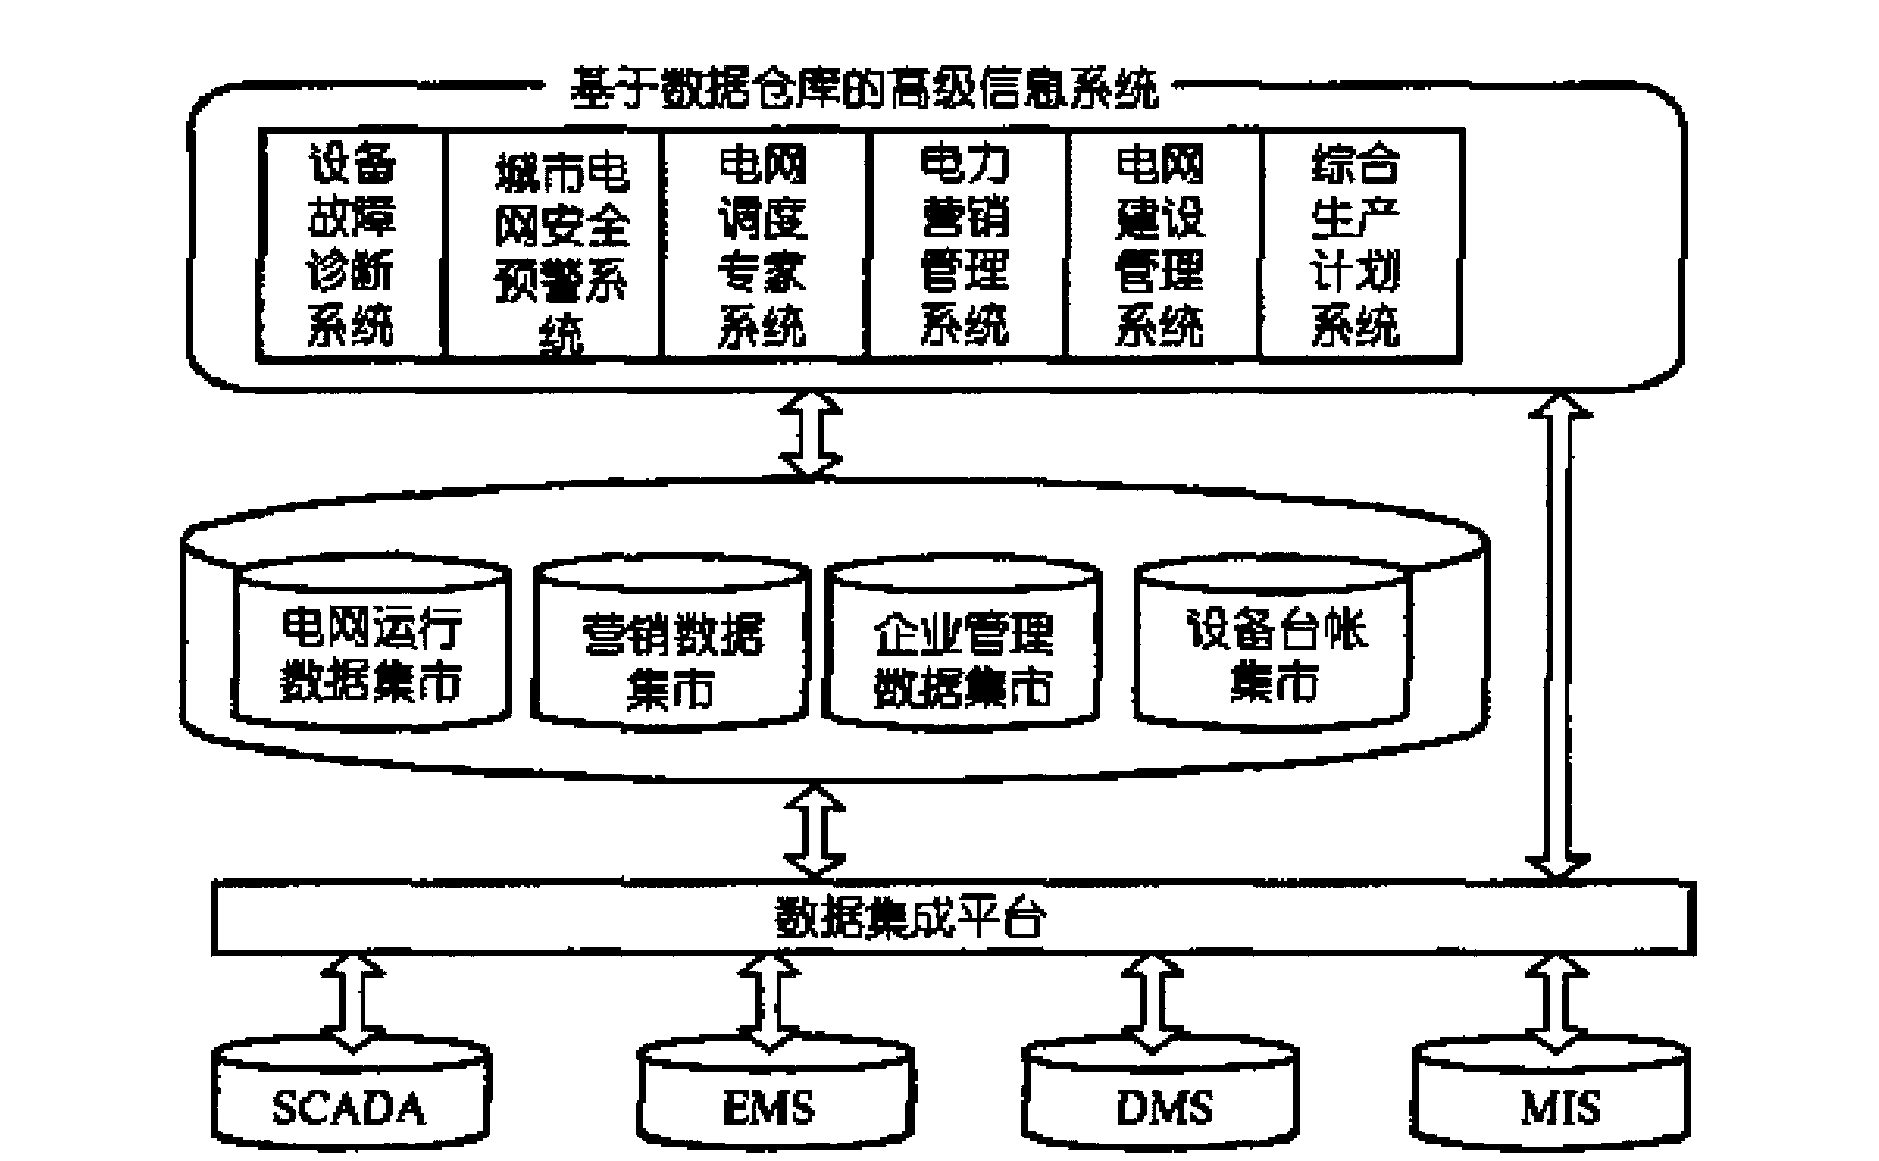 Data backup device of electric power information system